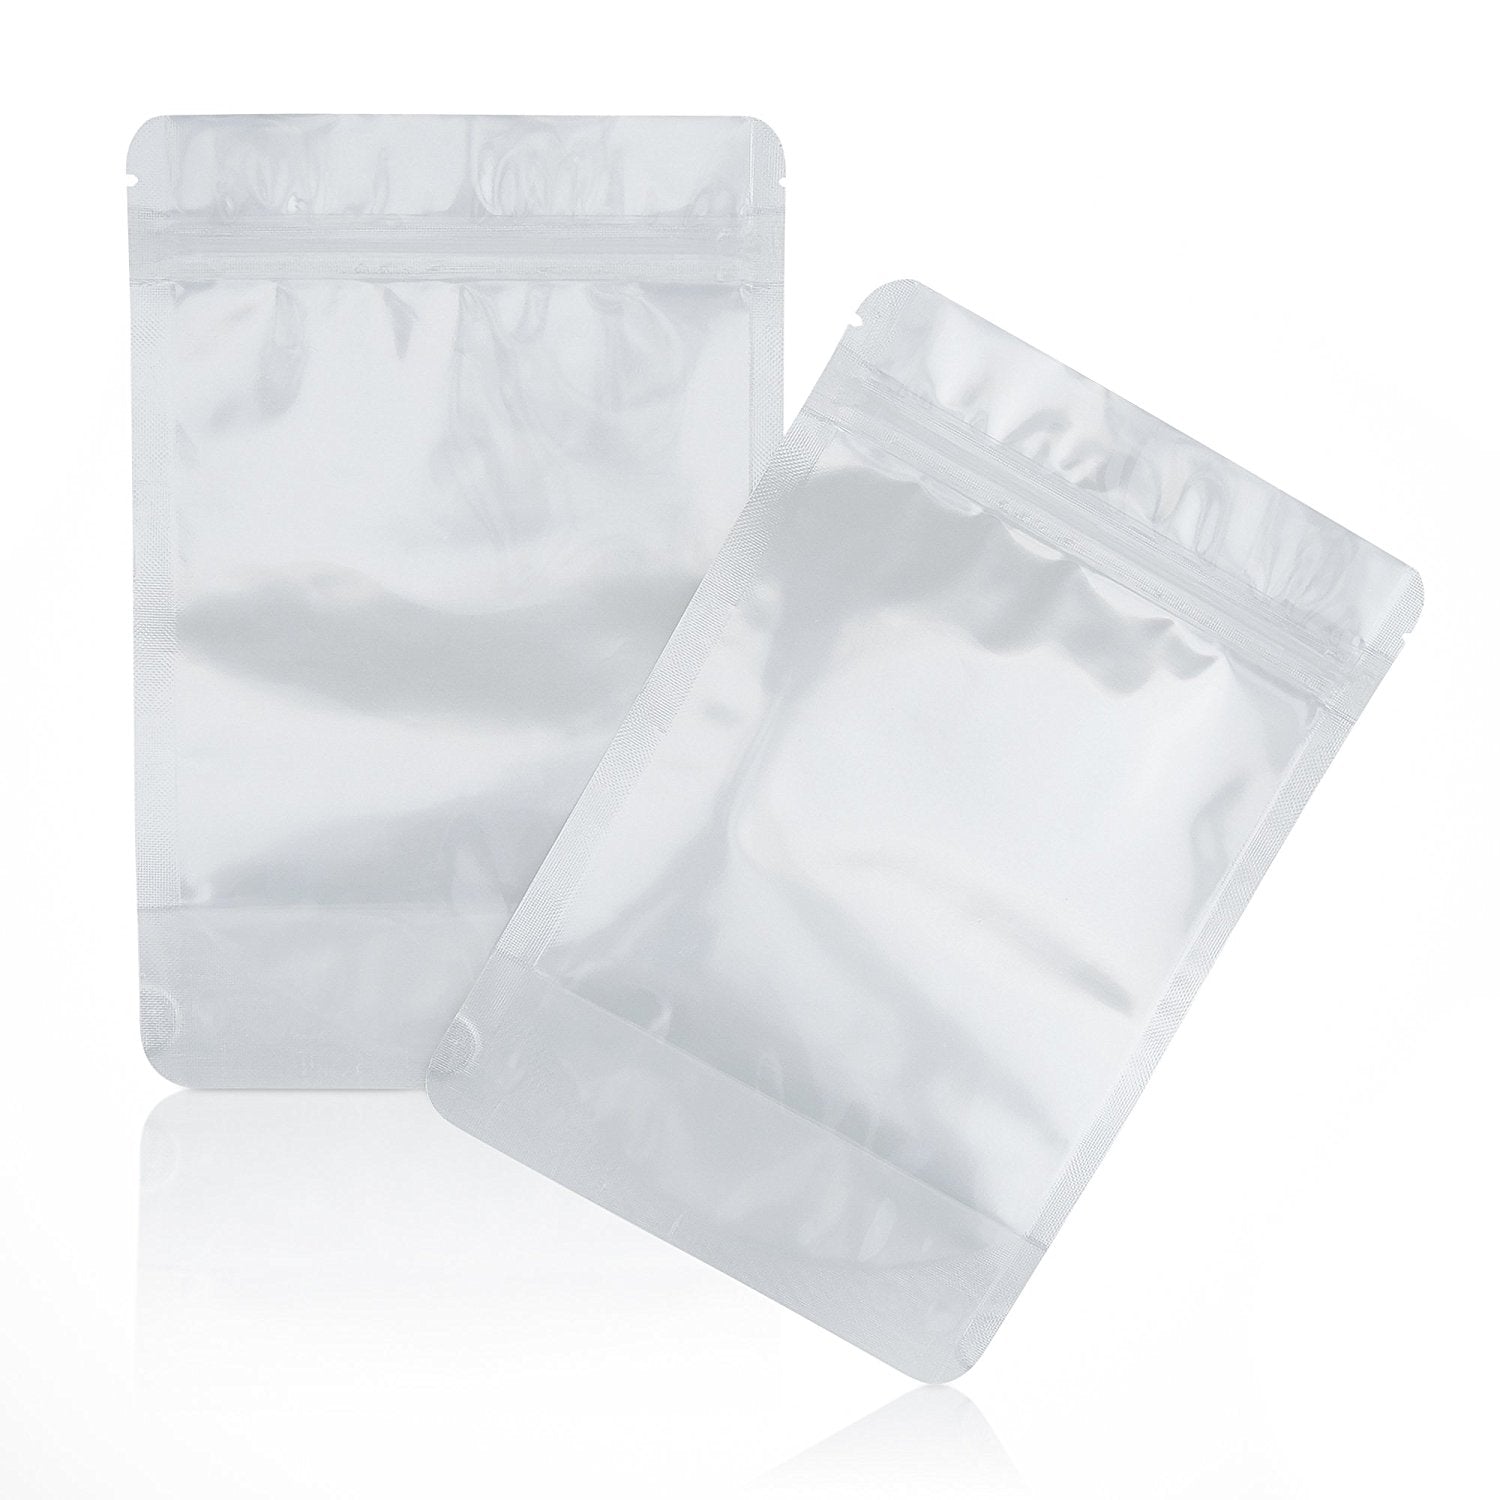 100 Pack - Stand Up Pouch Bags (6" x 9") - Clear Front with Aluminum Foil Back - Resealable Ziplock and Heat Sealable for Food Storage - RingBinderDepot.com